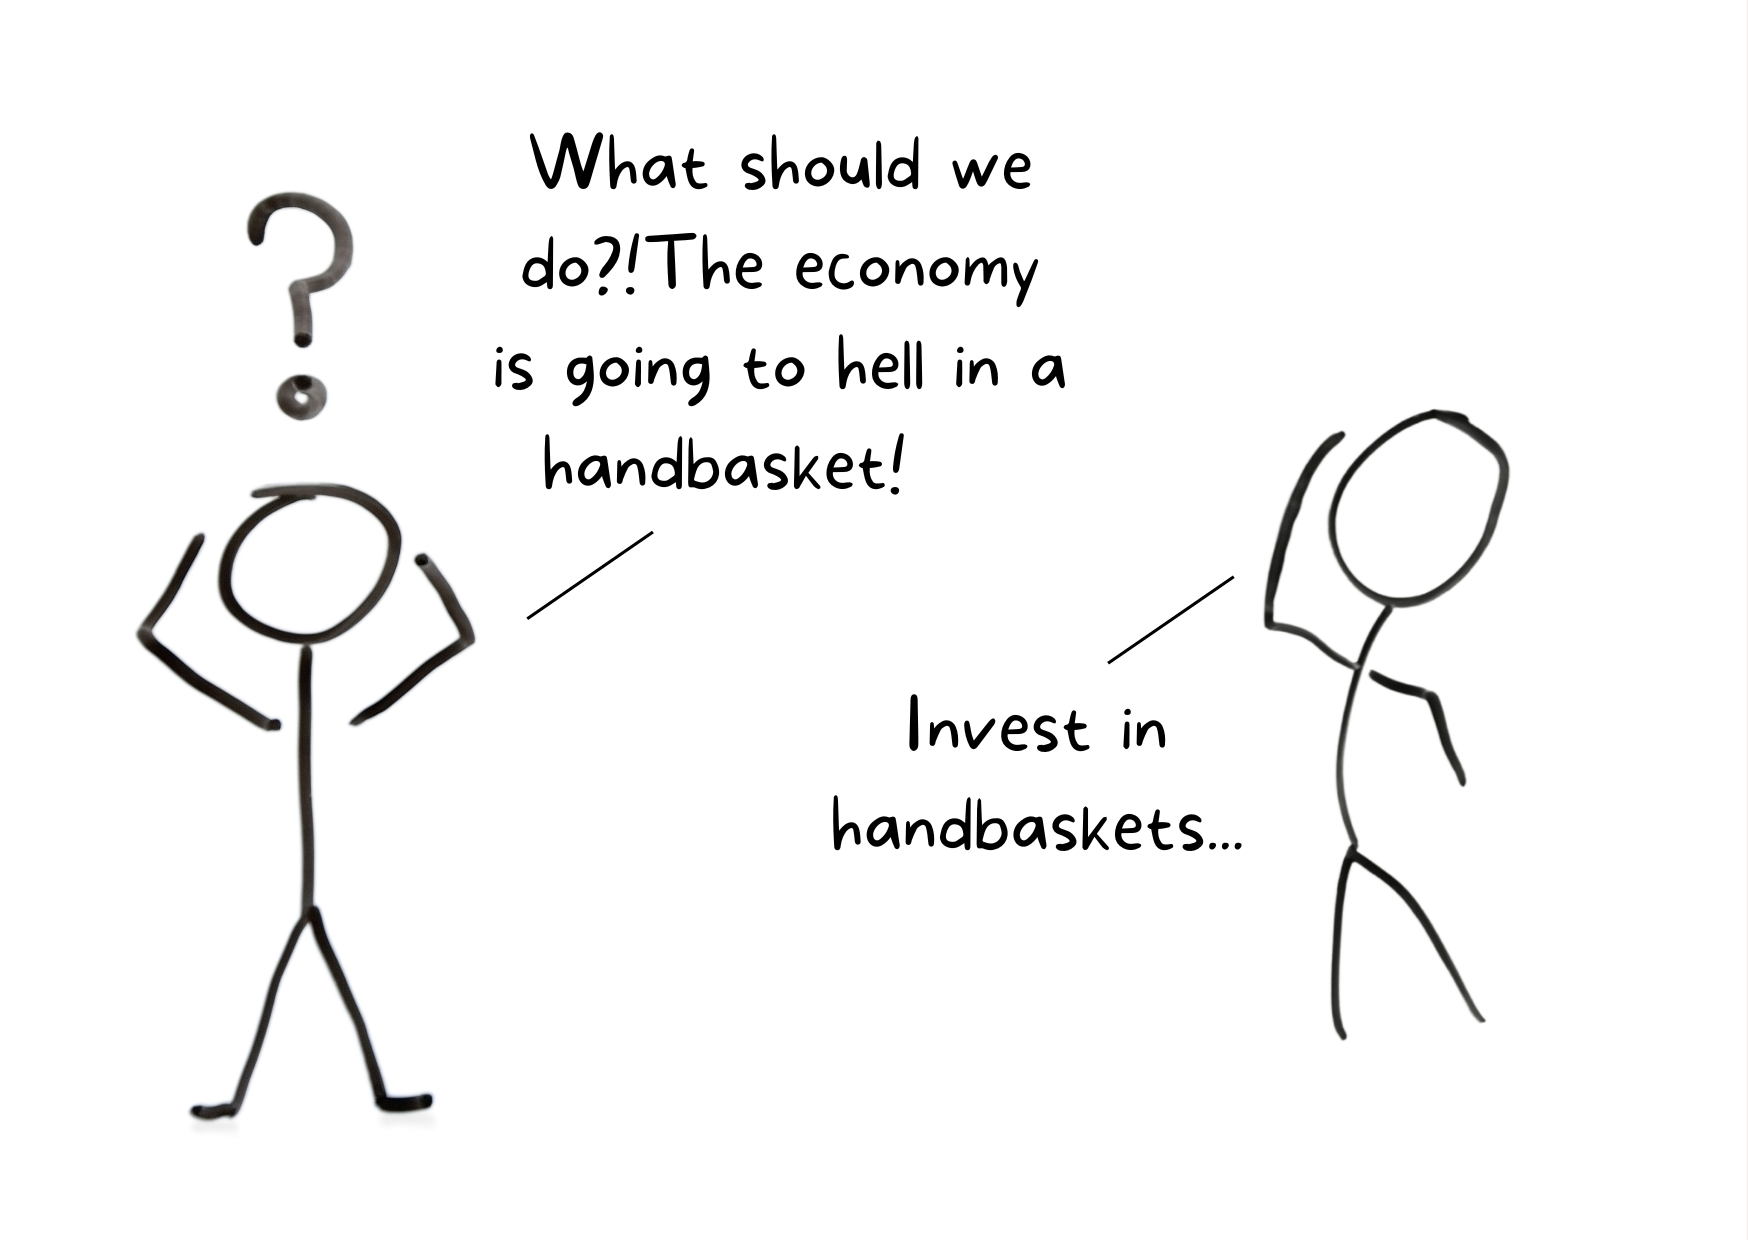 Two cartoon stick figures talking. One says: "What should we do?! The economy is going to hell in a handbasket!" The other replies: "invest in hand baskets"